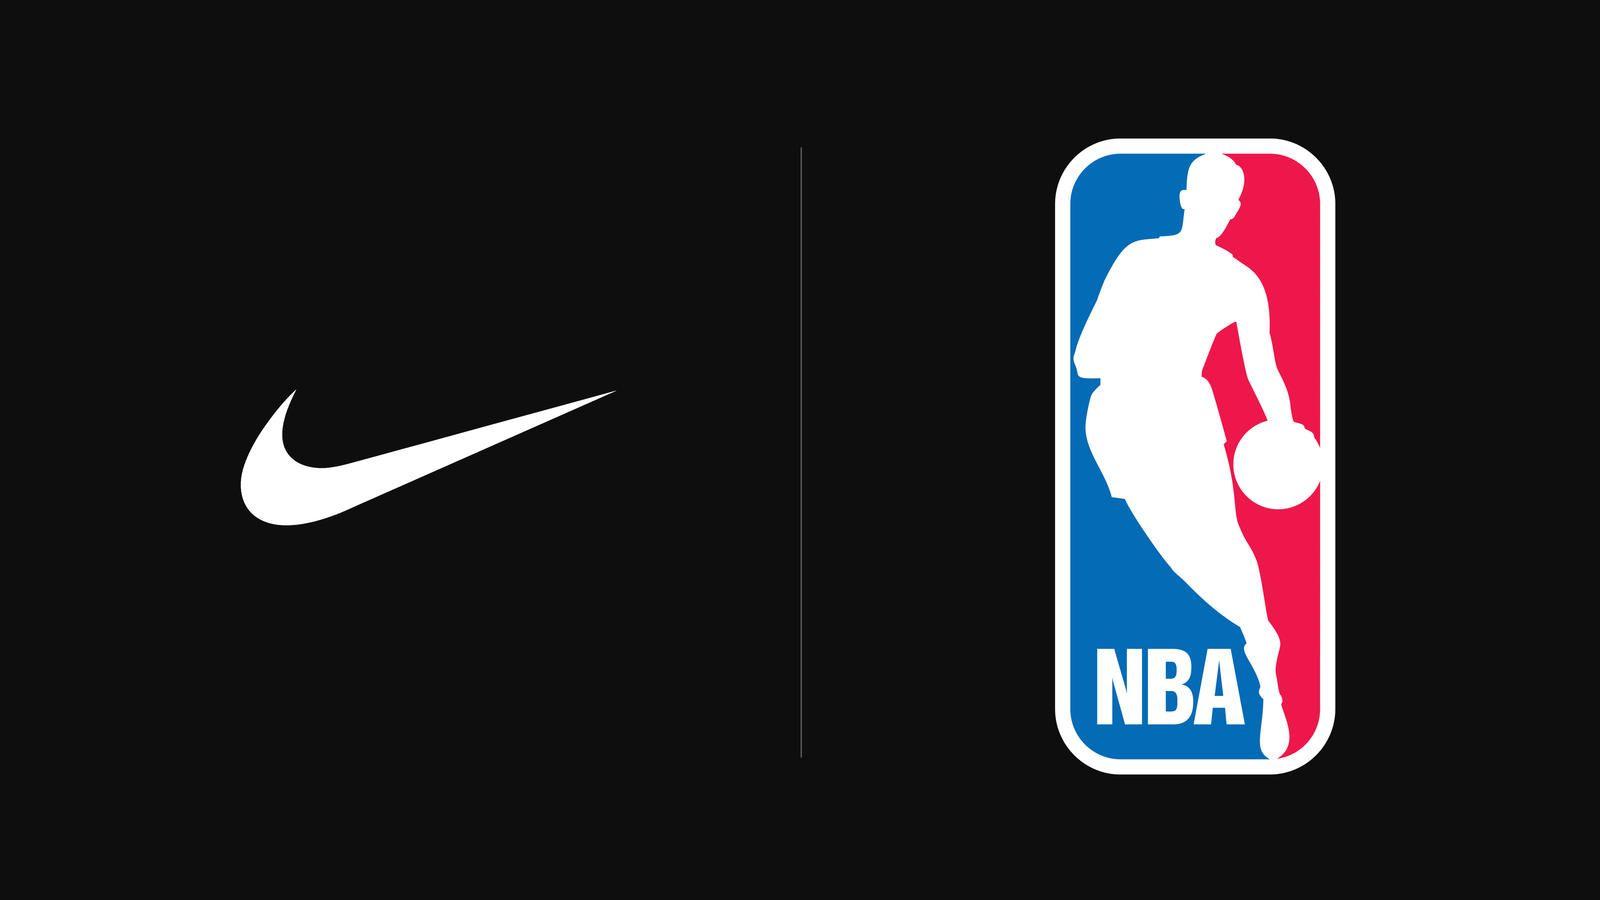 Official NBA Logo - NIKE, Inc. to Become Exclusive Oncourt Uniform and Apparel Provider